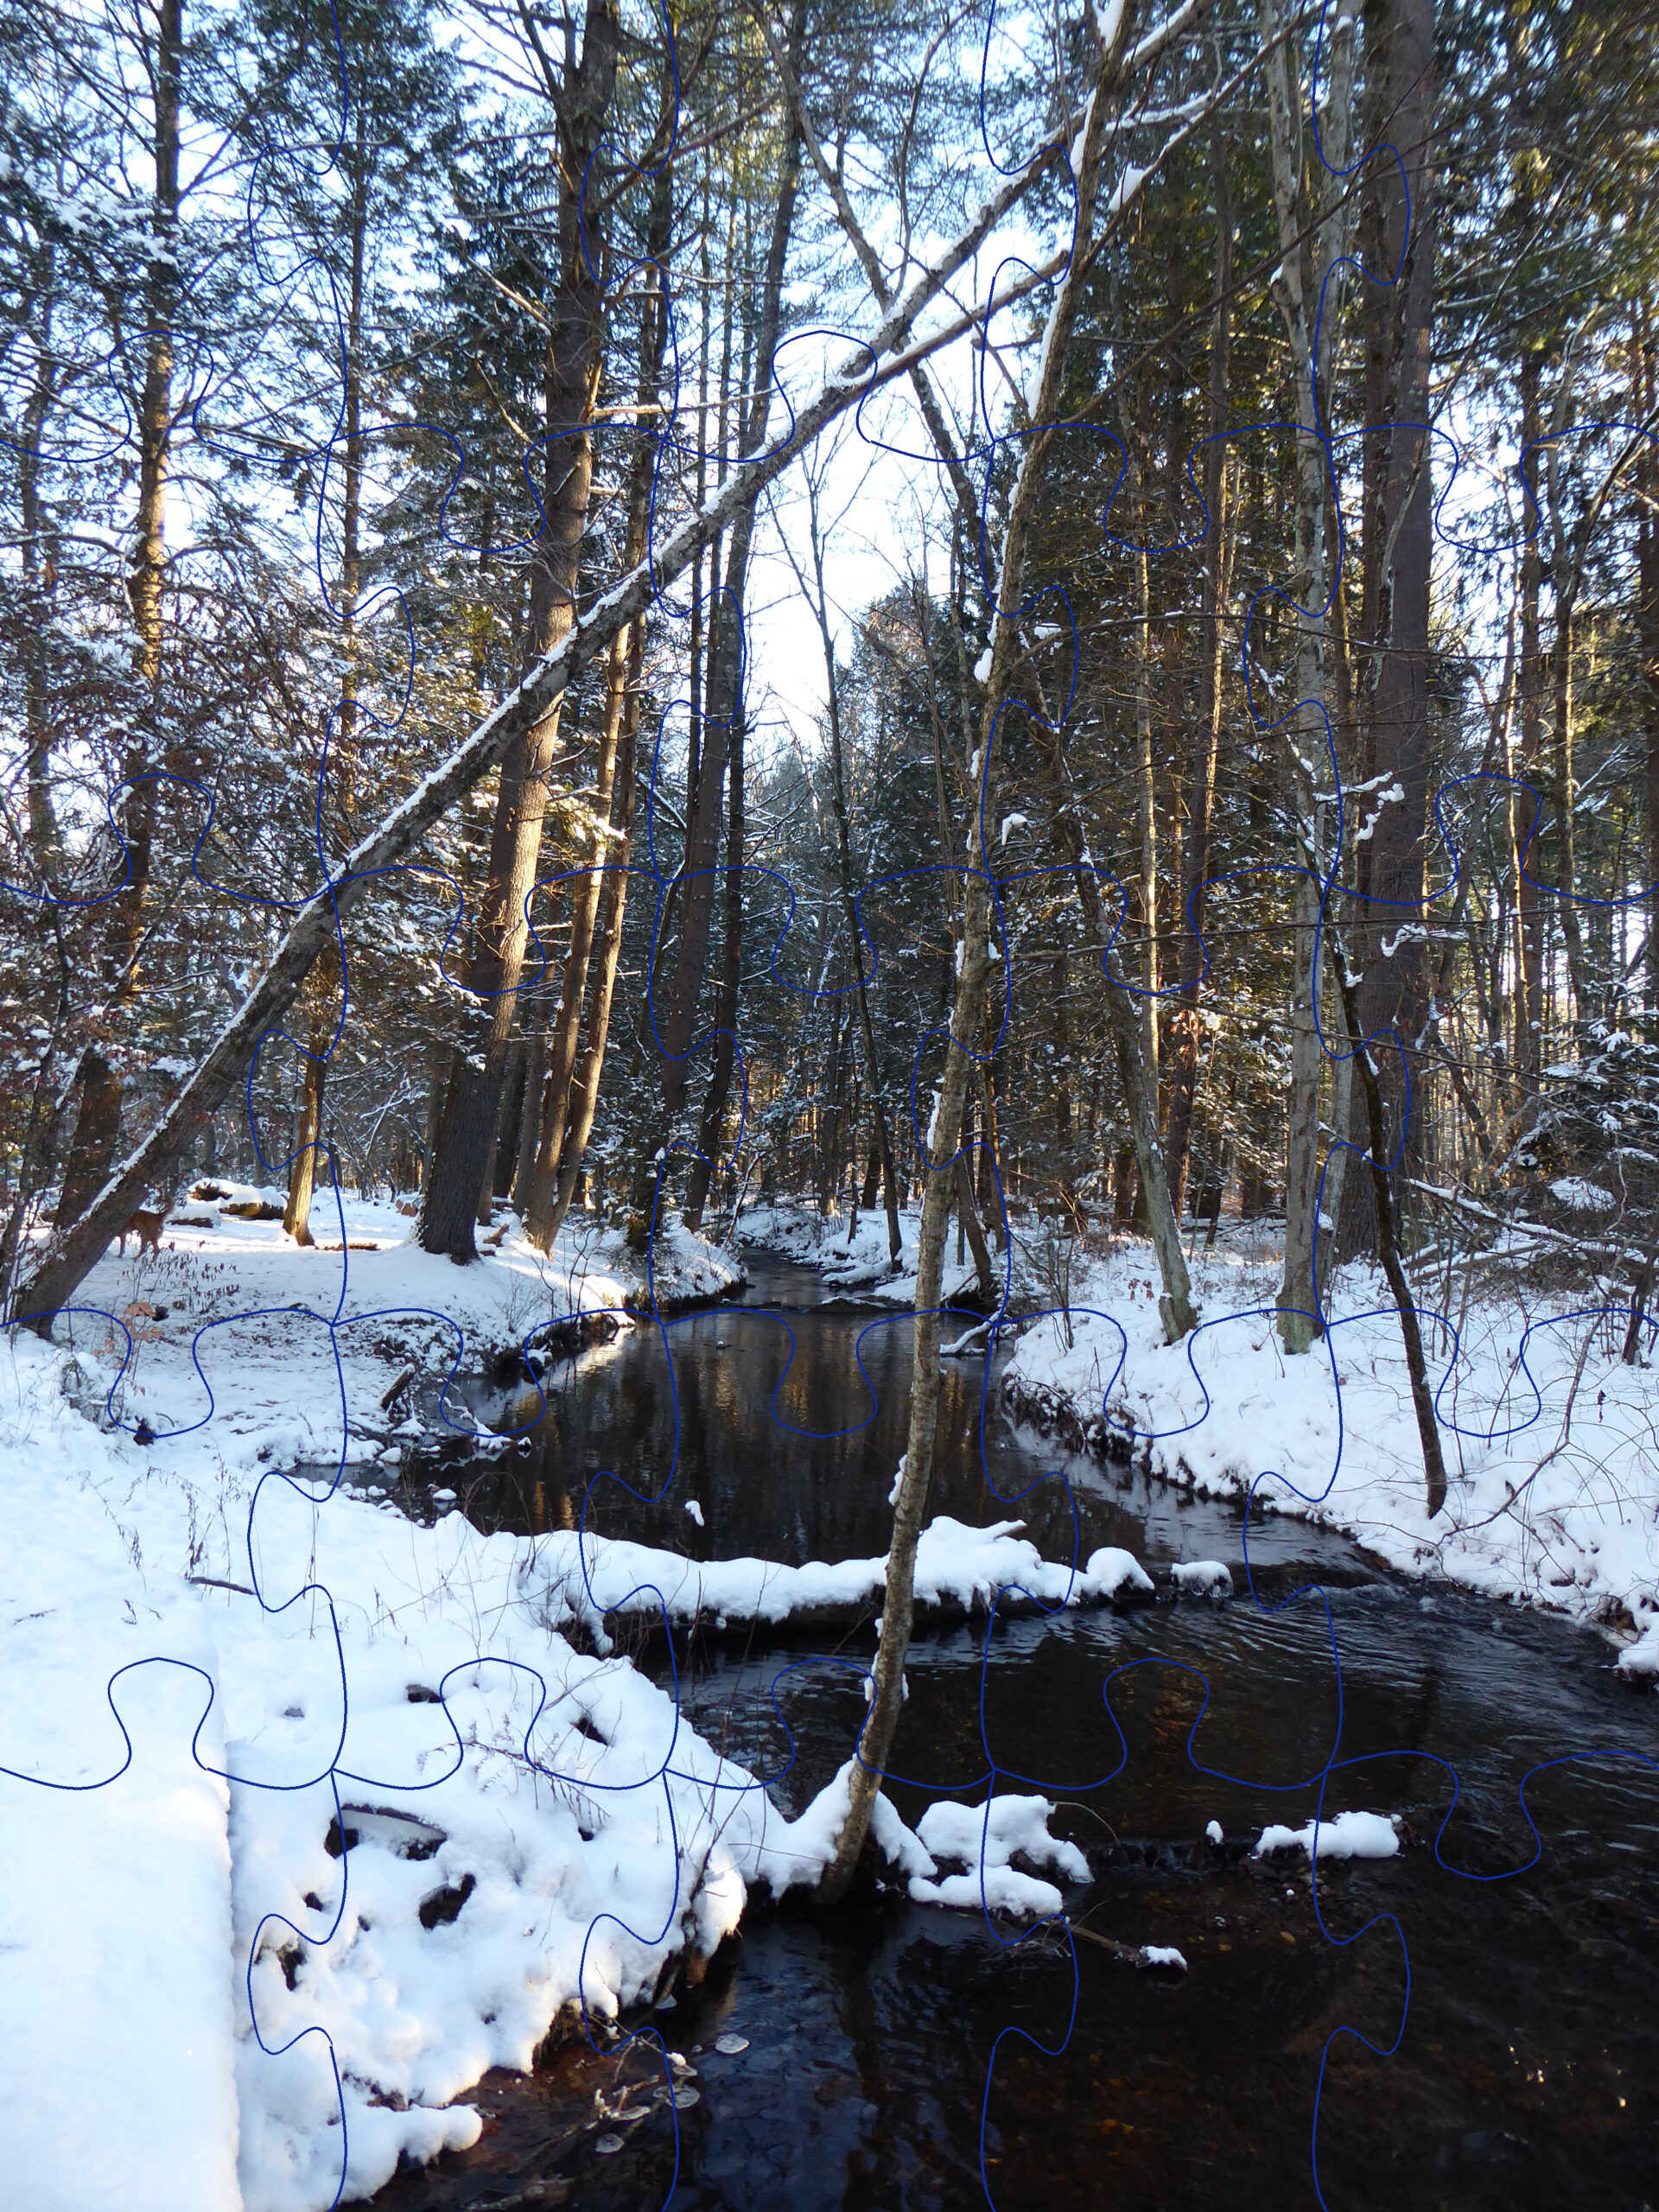 In the completed jigsaw puzzle, a central streak of blue sky stretches nearly down to meet the second bend in the dark stream as it flows gently between the silent, snowy banks.